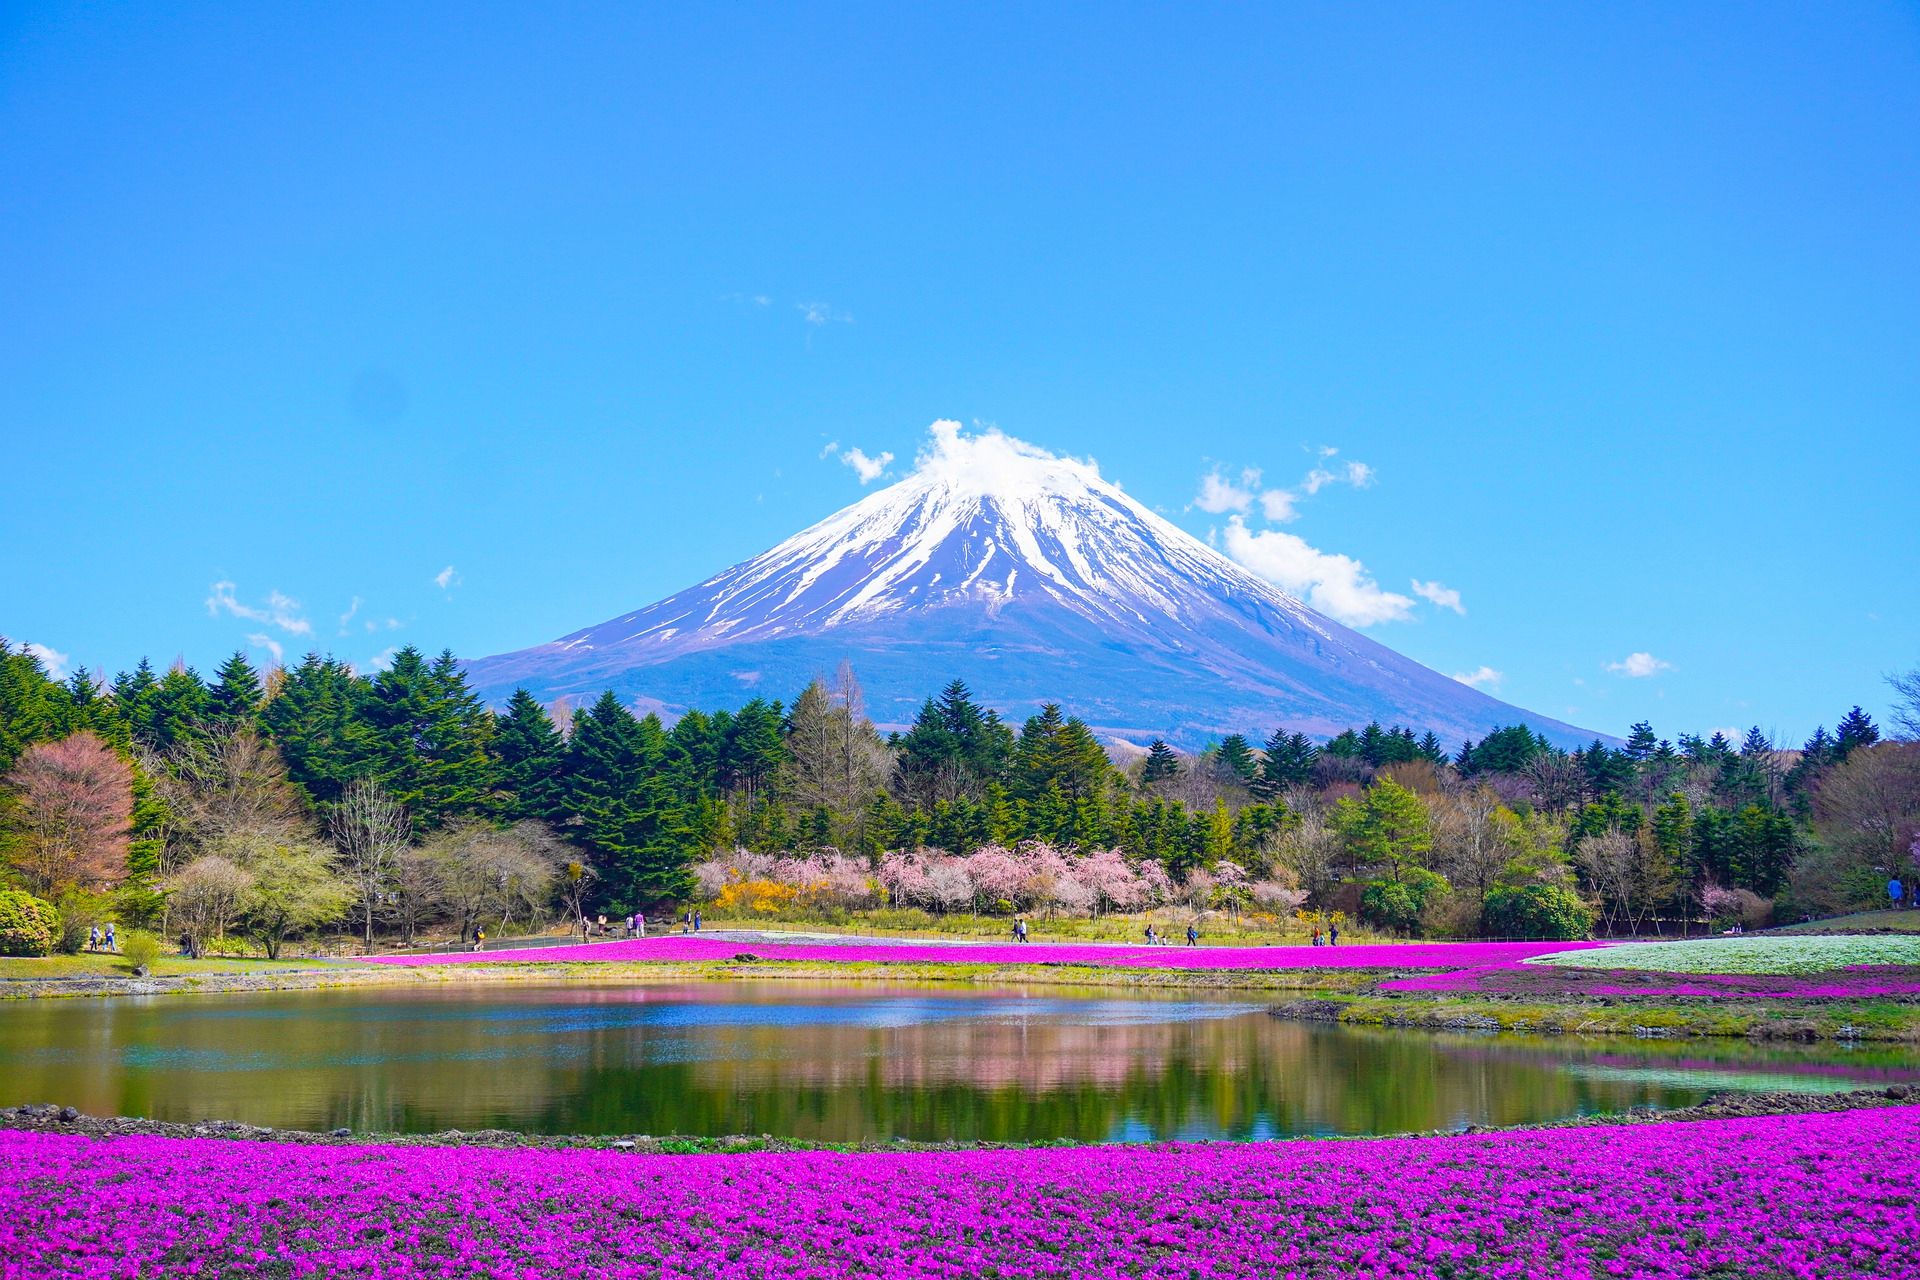 Japan to charge tourist fee for Mount Fuji due to overtourism